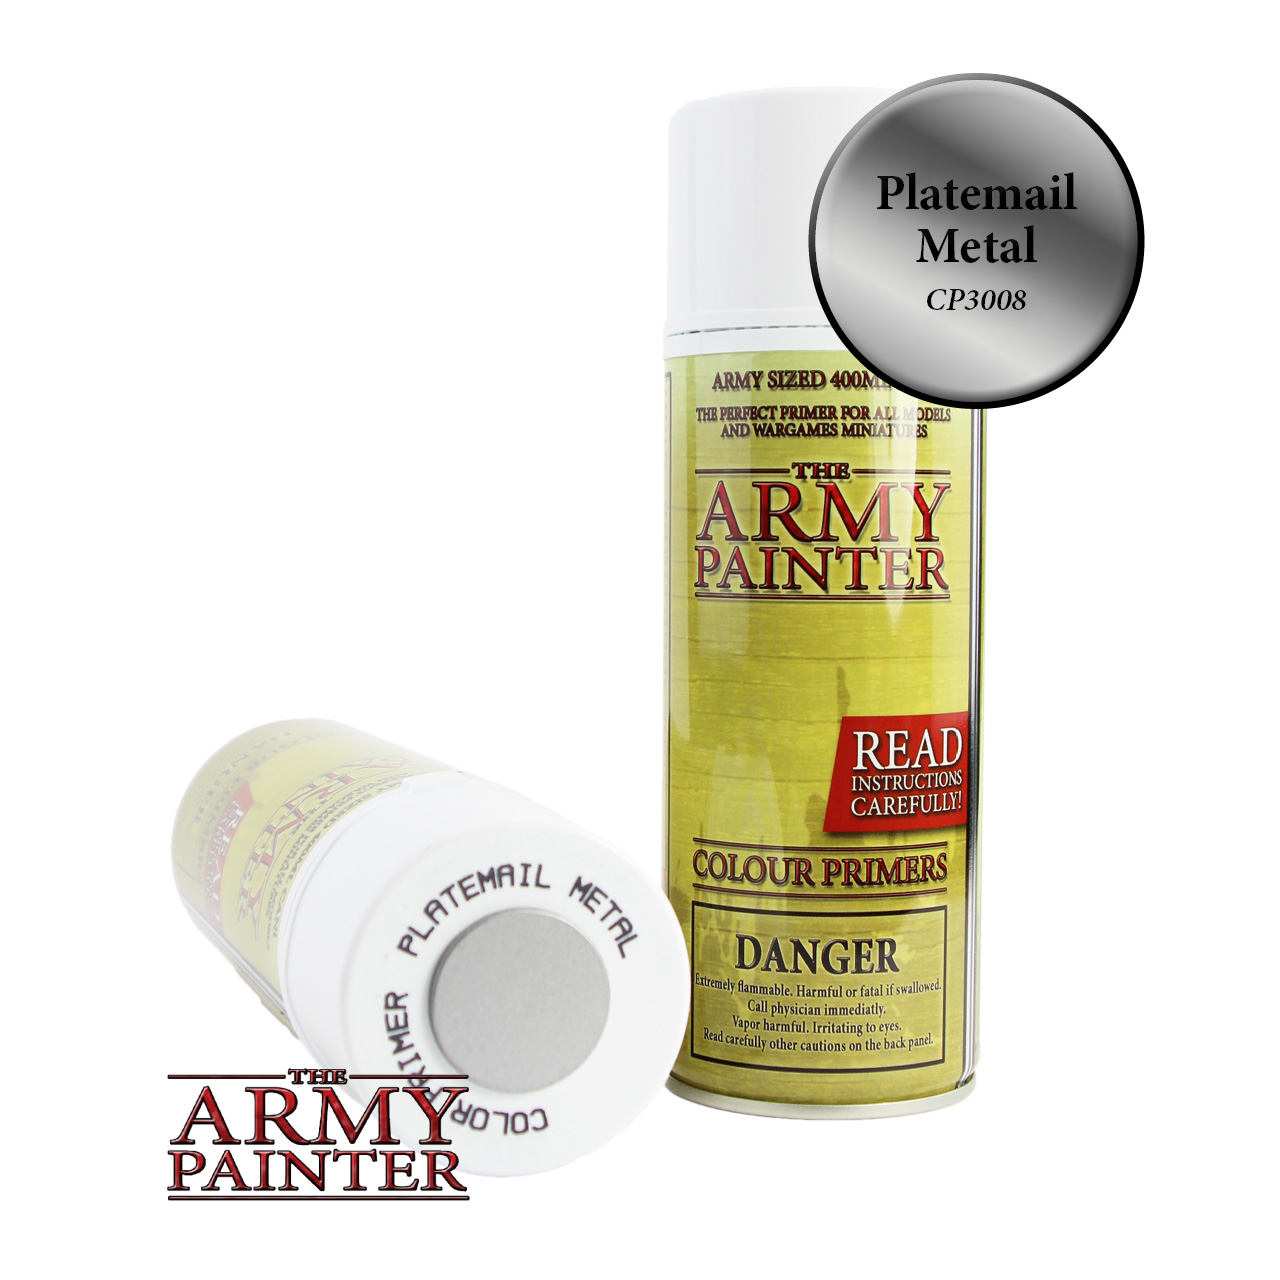 43008 CP3008S ARMY PAINTER SPRAY PLATE MAIL METAL